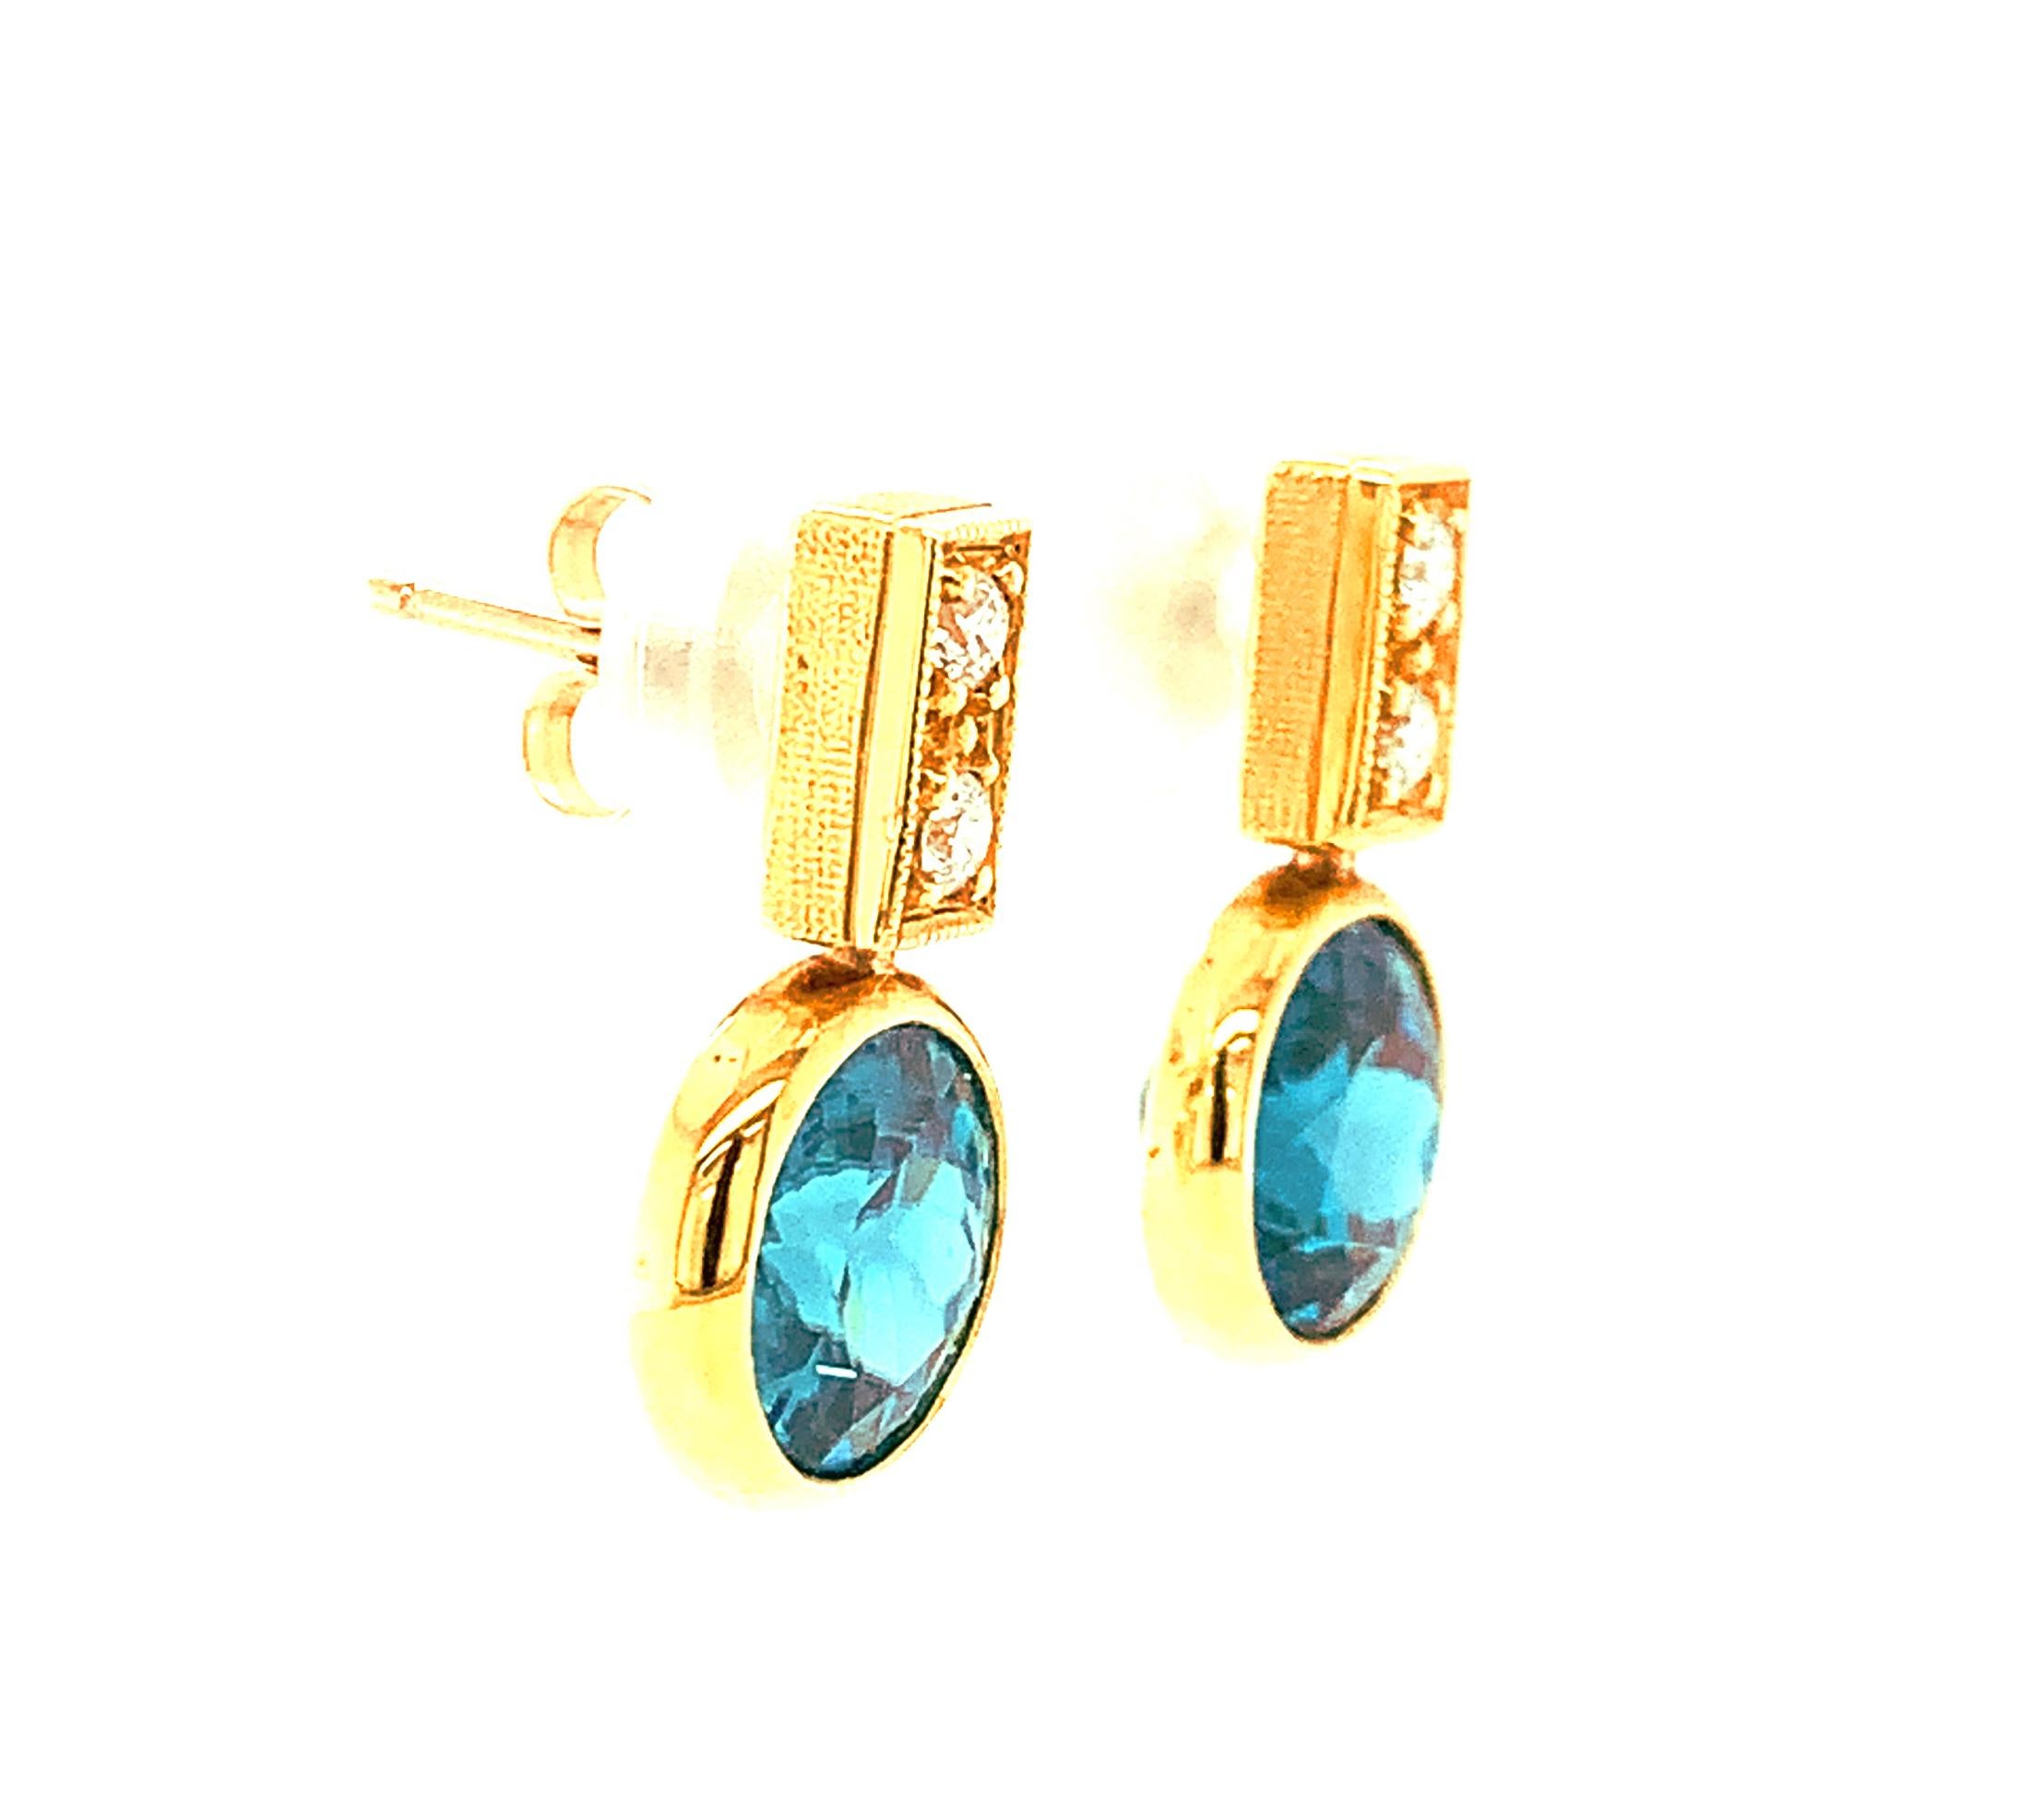 Round Cut Blue Zircon and Diamond Drop Earrings in 18K Yellow Gold, 9.64 Carats Total For Sale